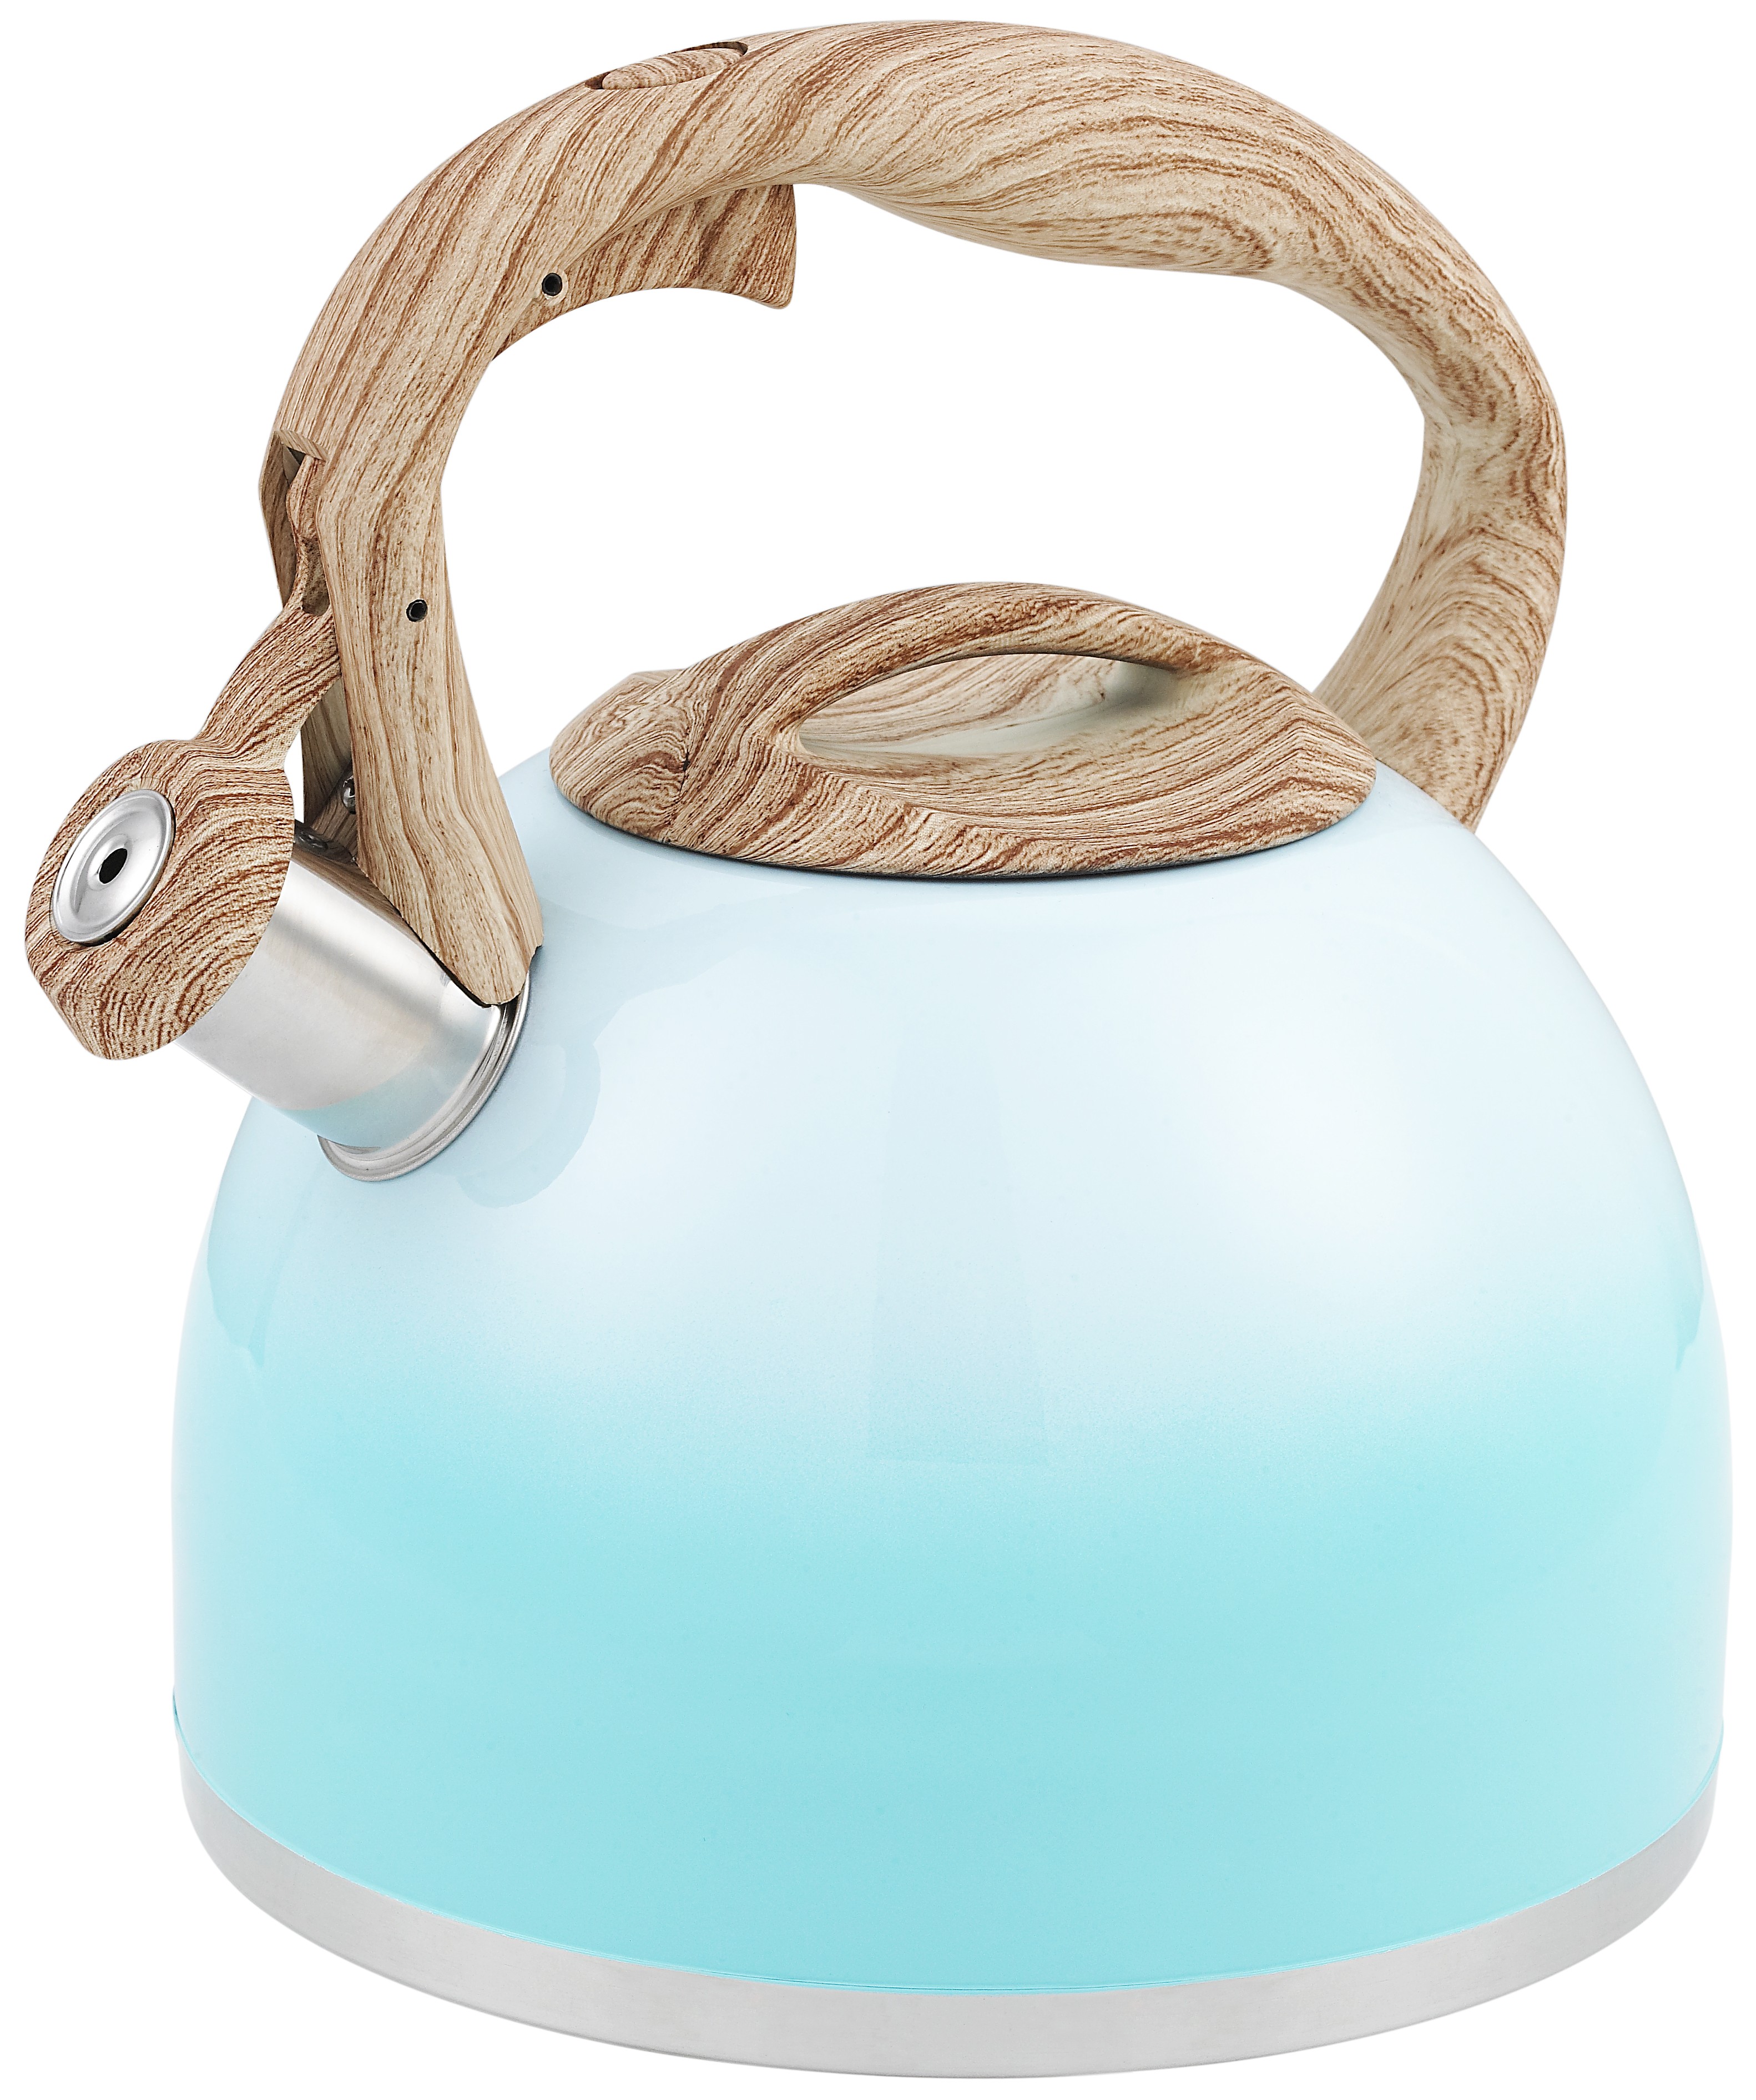 Choosing a Whistling Kettle